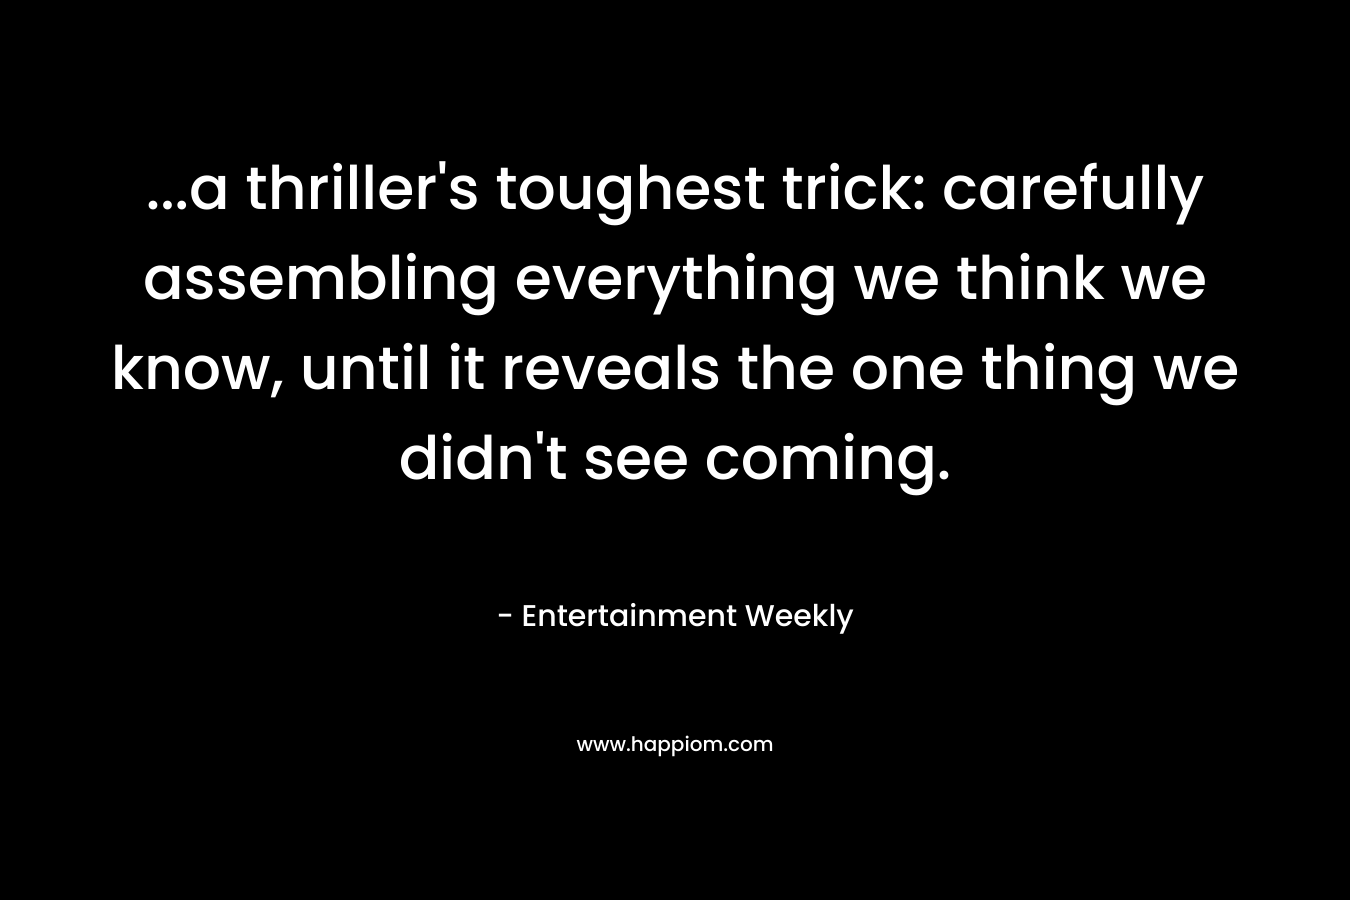 …a thriller’s toughest trick: carefully assembling everything we think we know, until it reveals the one thing we didn’t see coming. – Entertainment Weekly